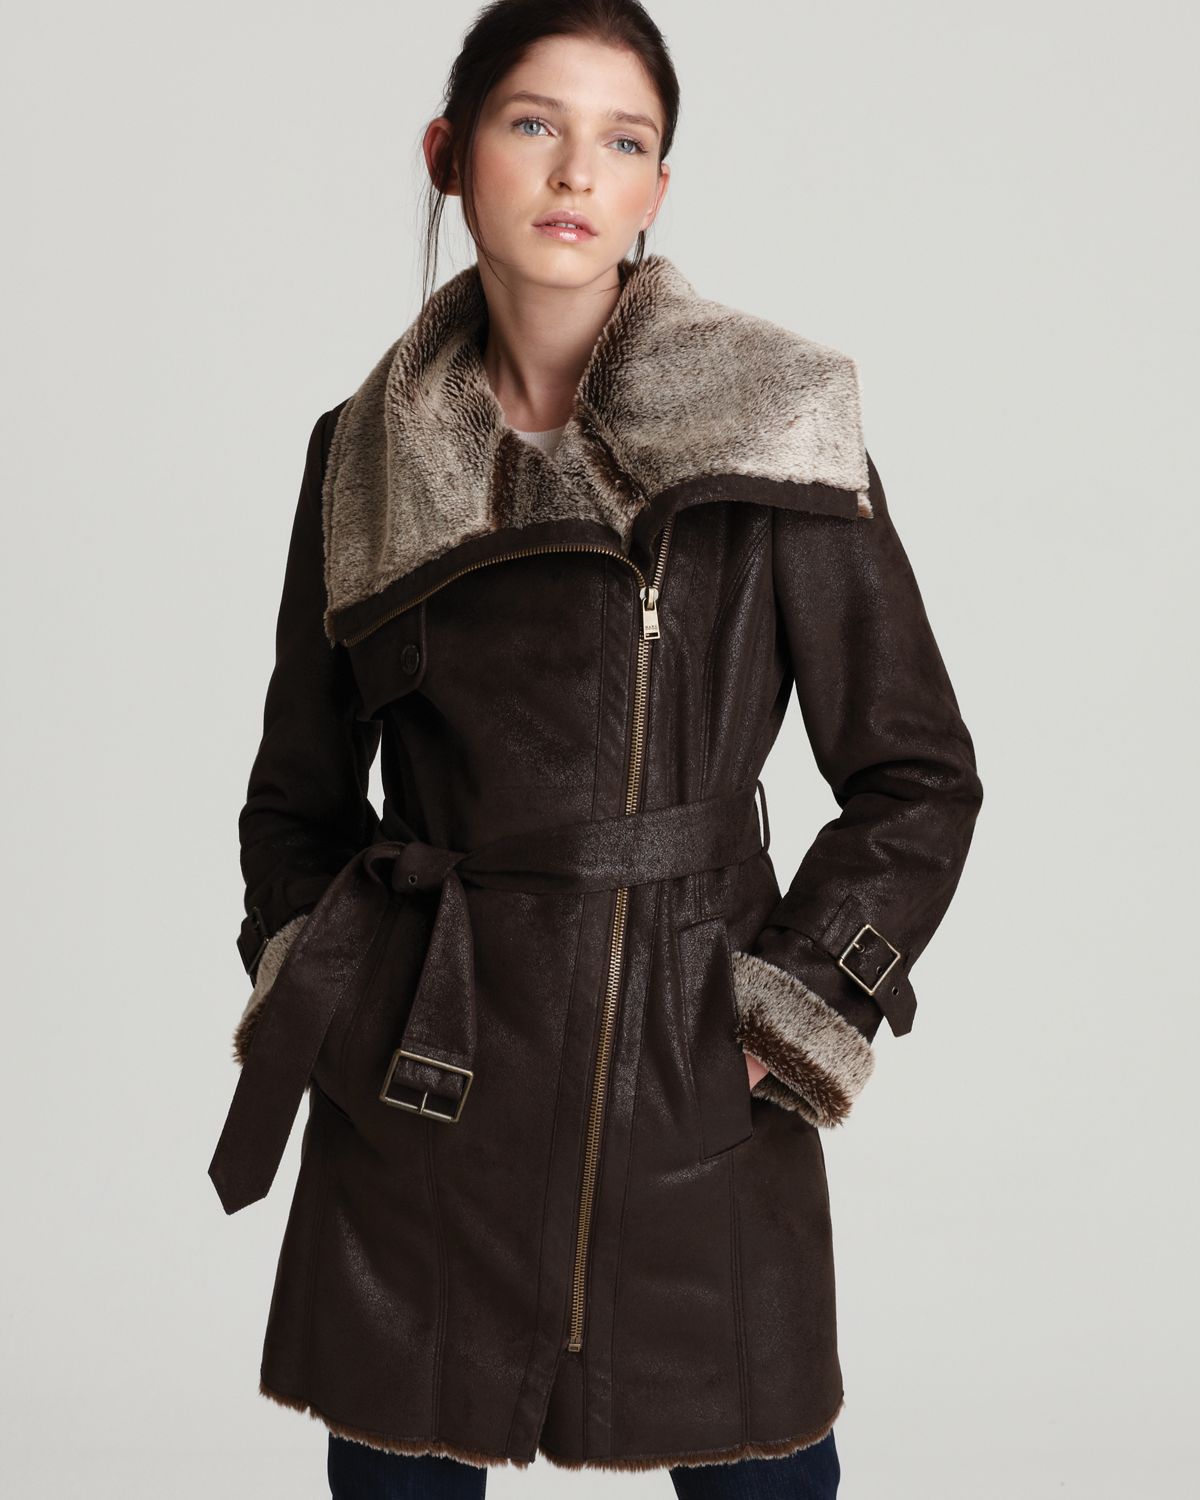 Lyst - Marc New York Distressed Faux Shearling Coat in Brown